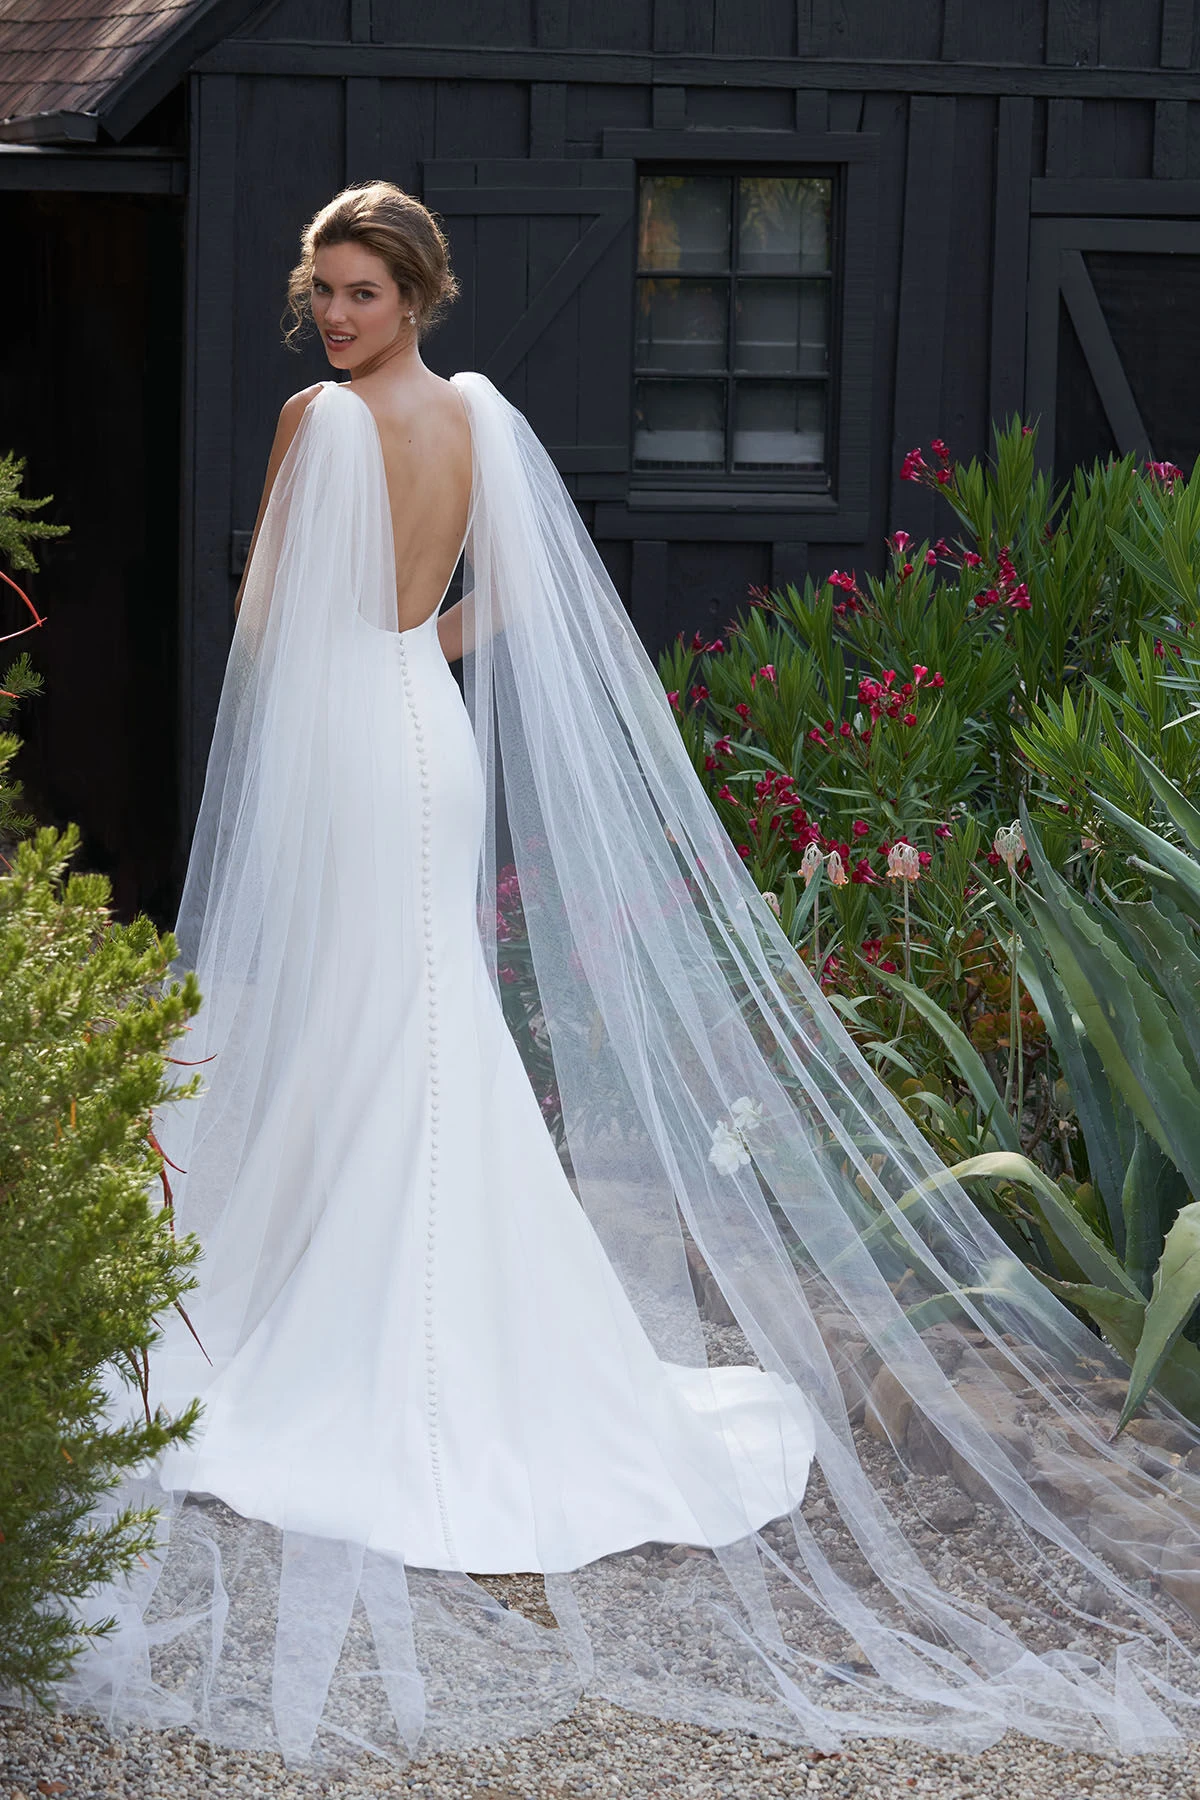 Youlapan G52 Bridal Wings Veil 2pc Sexy ...